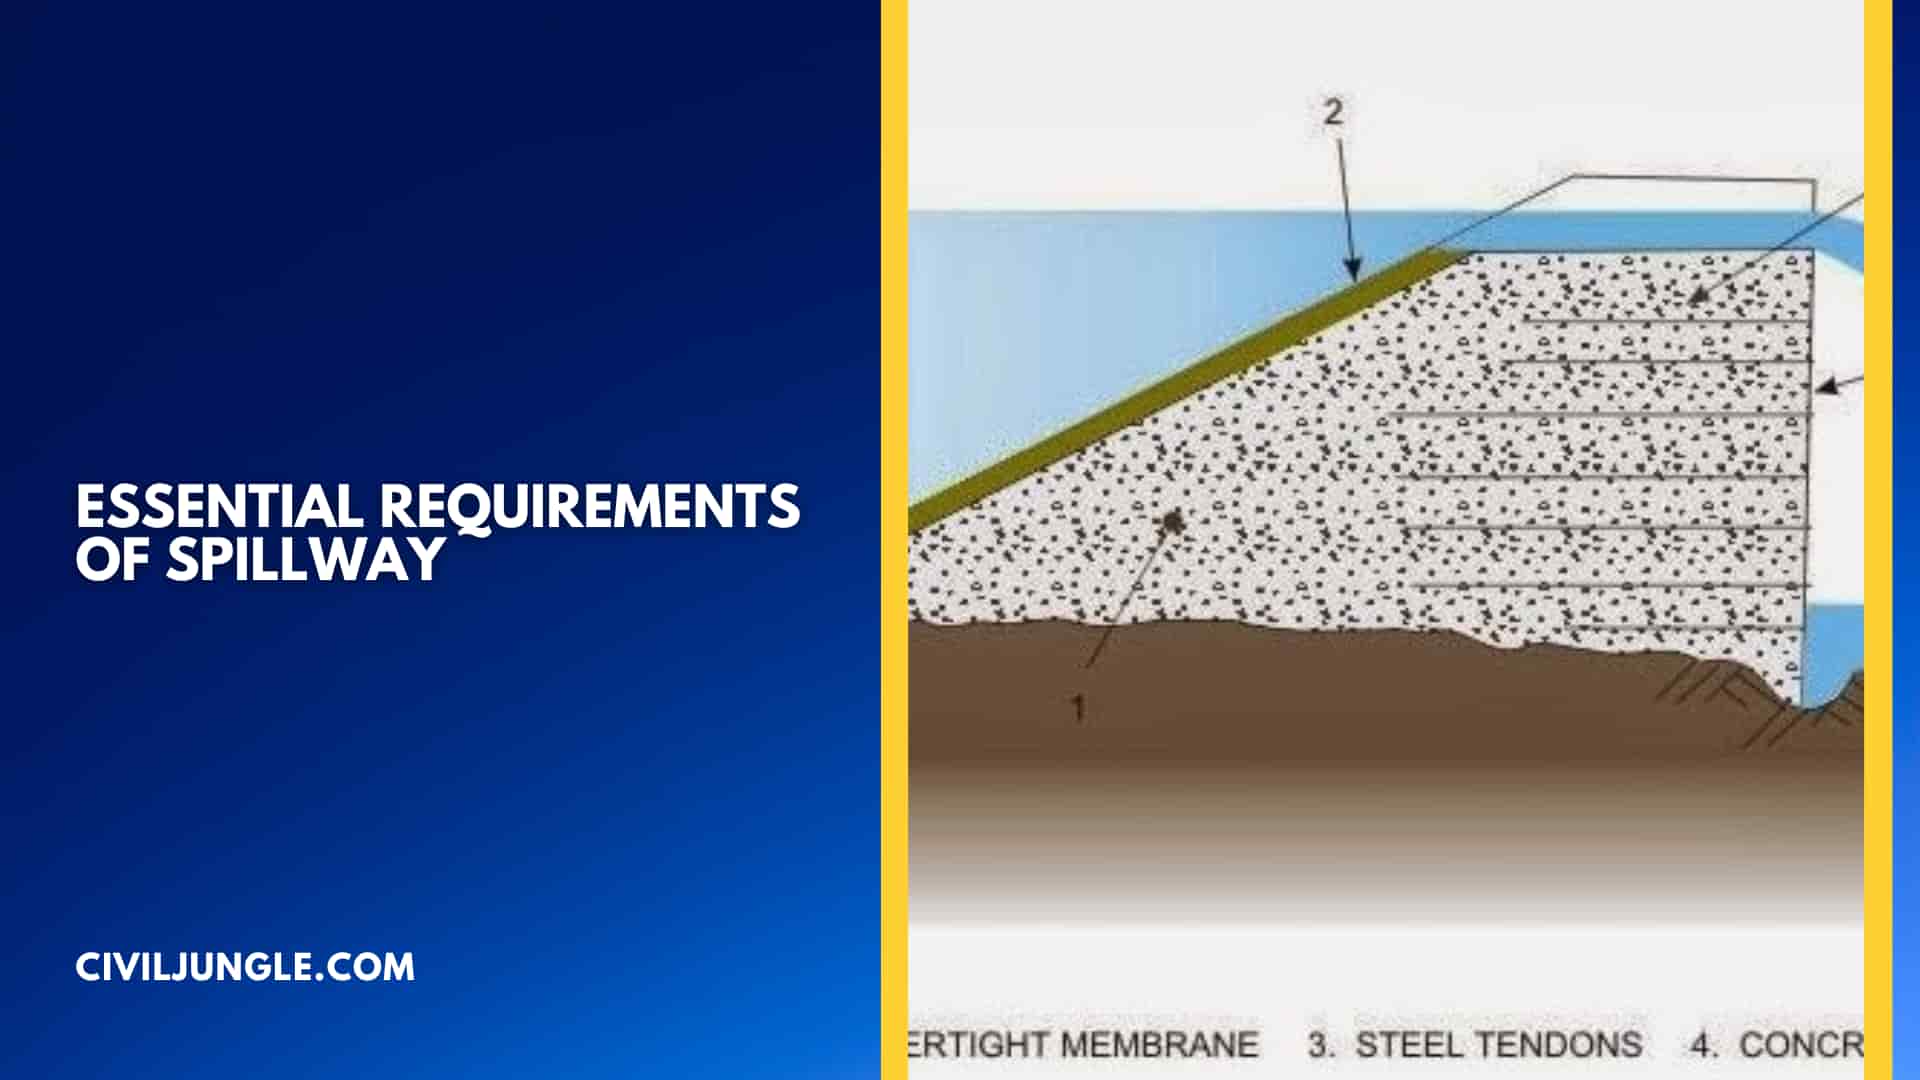 Essential Requirements of Spillway